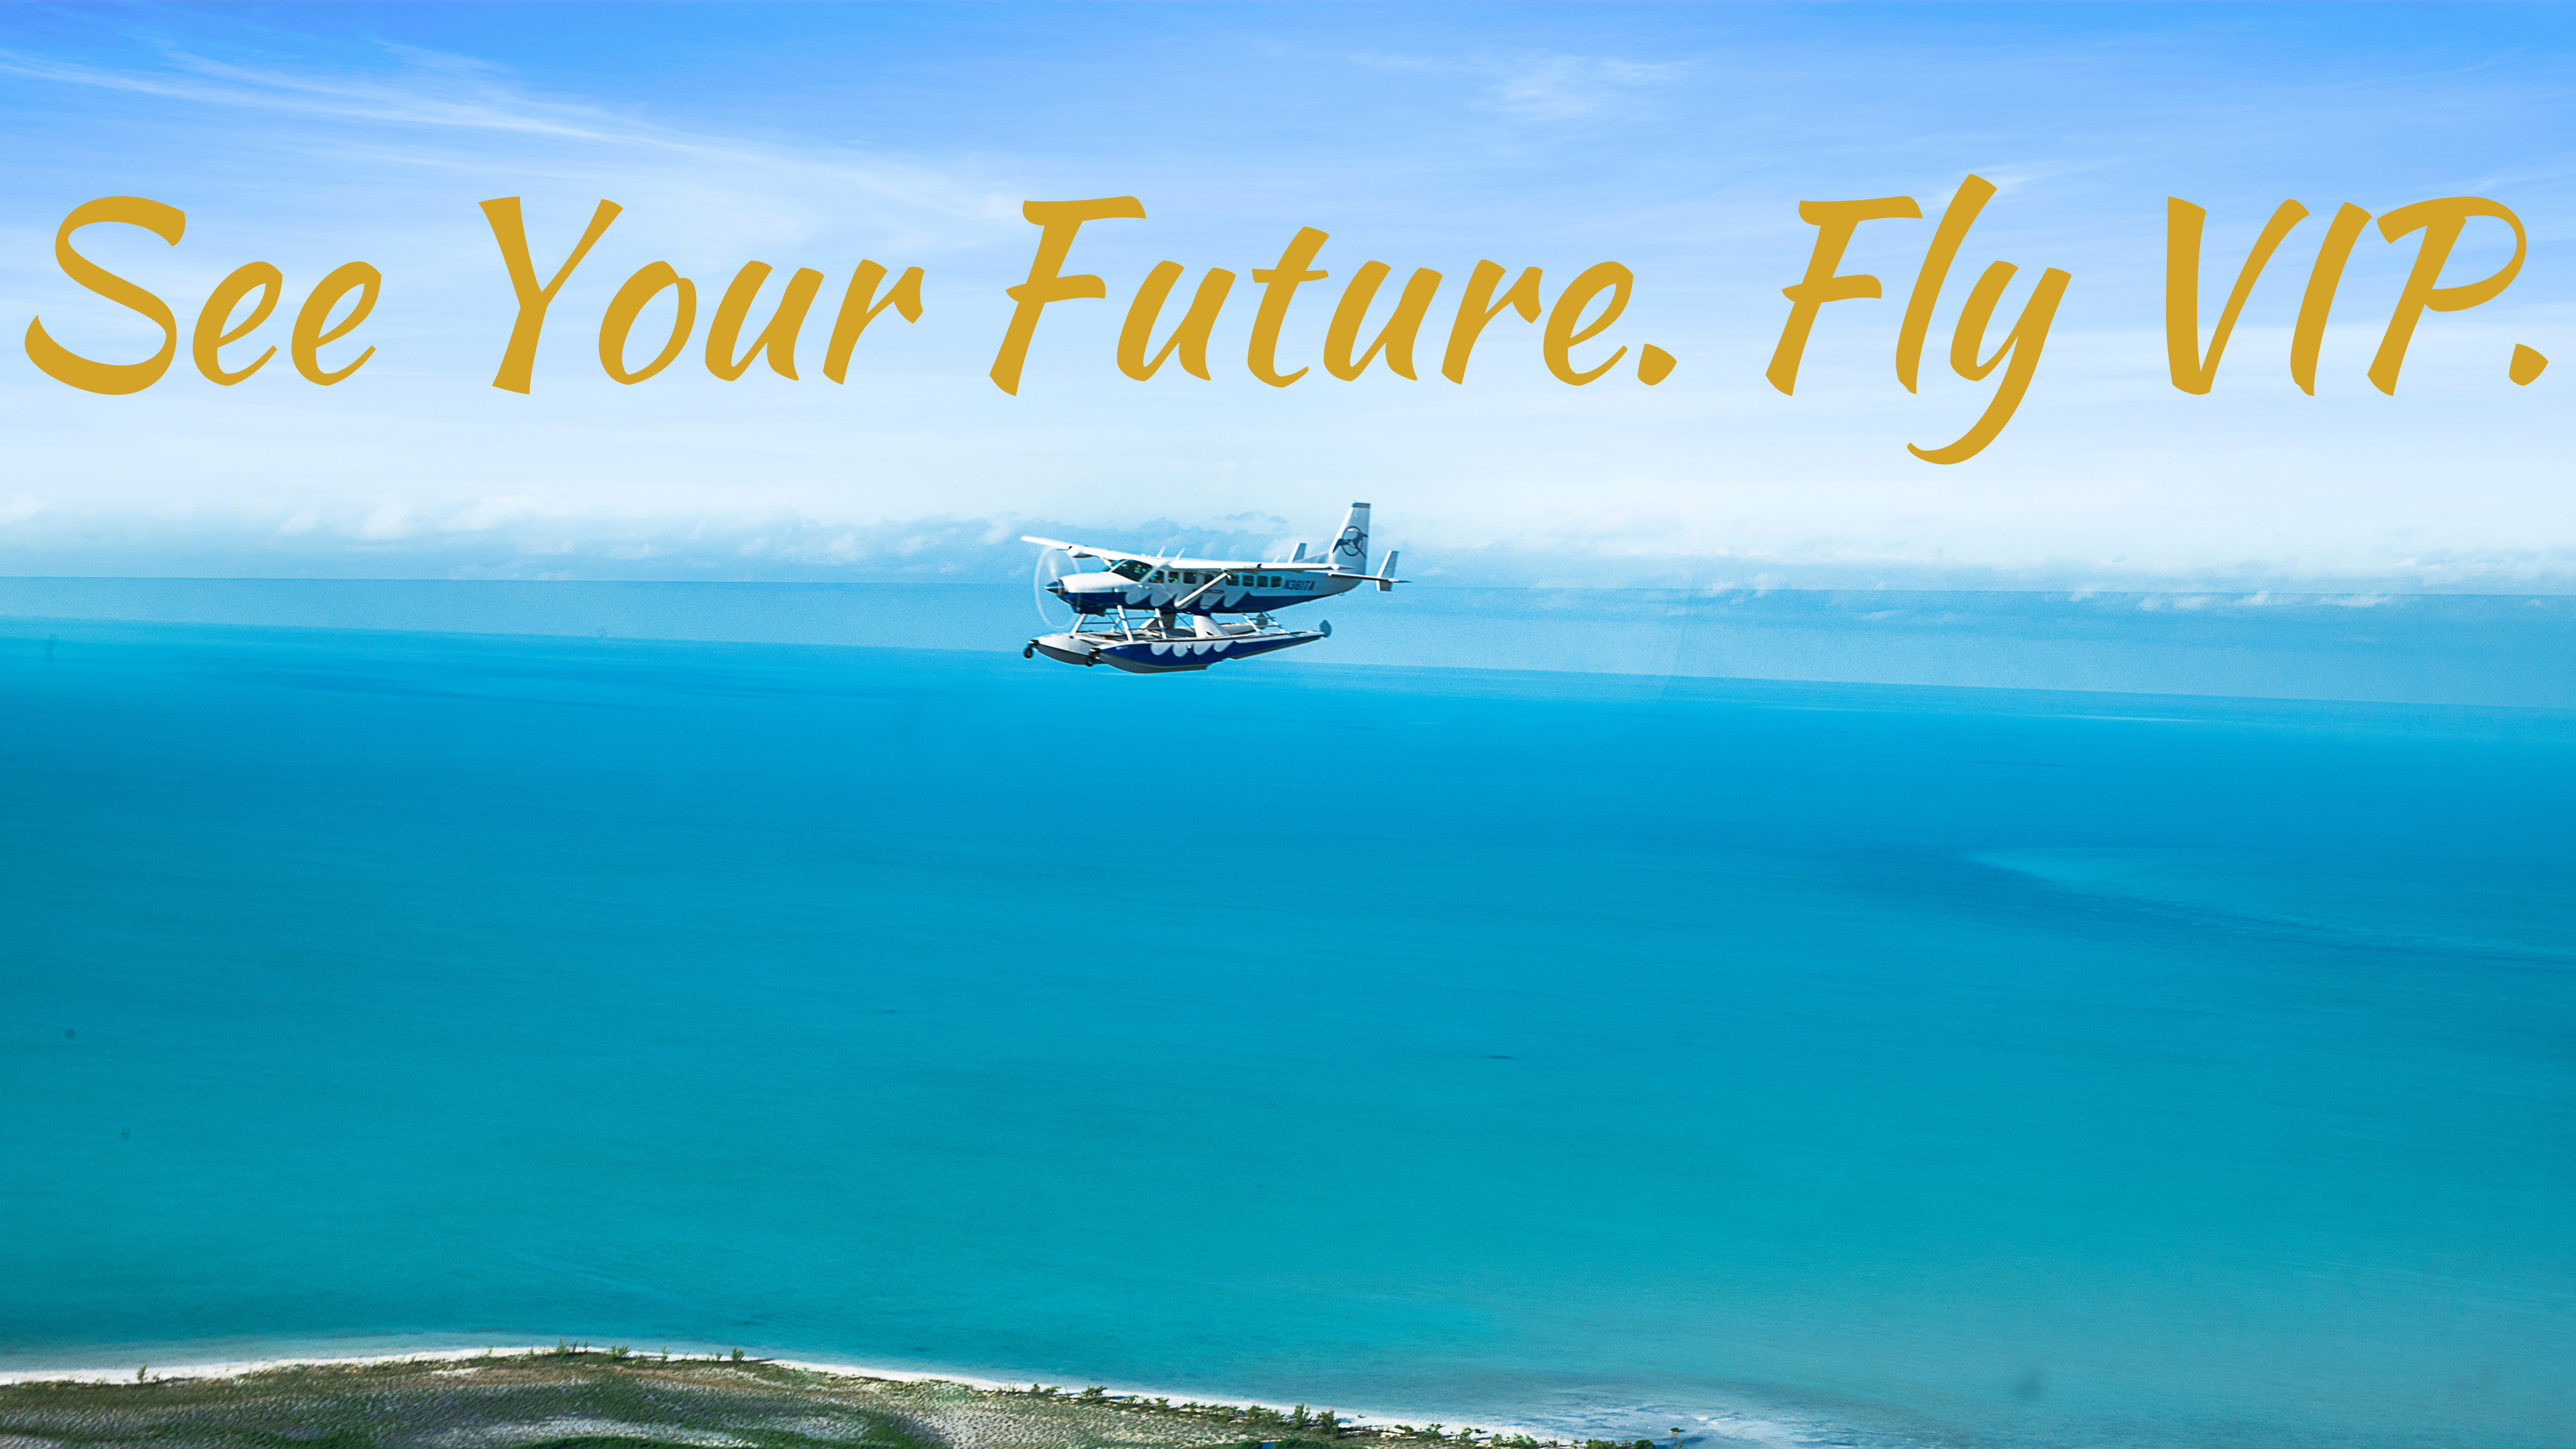 See the Future. Fly VIP.